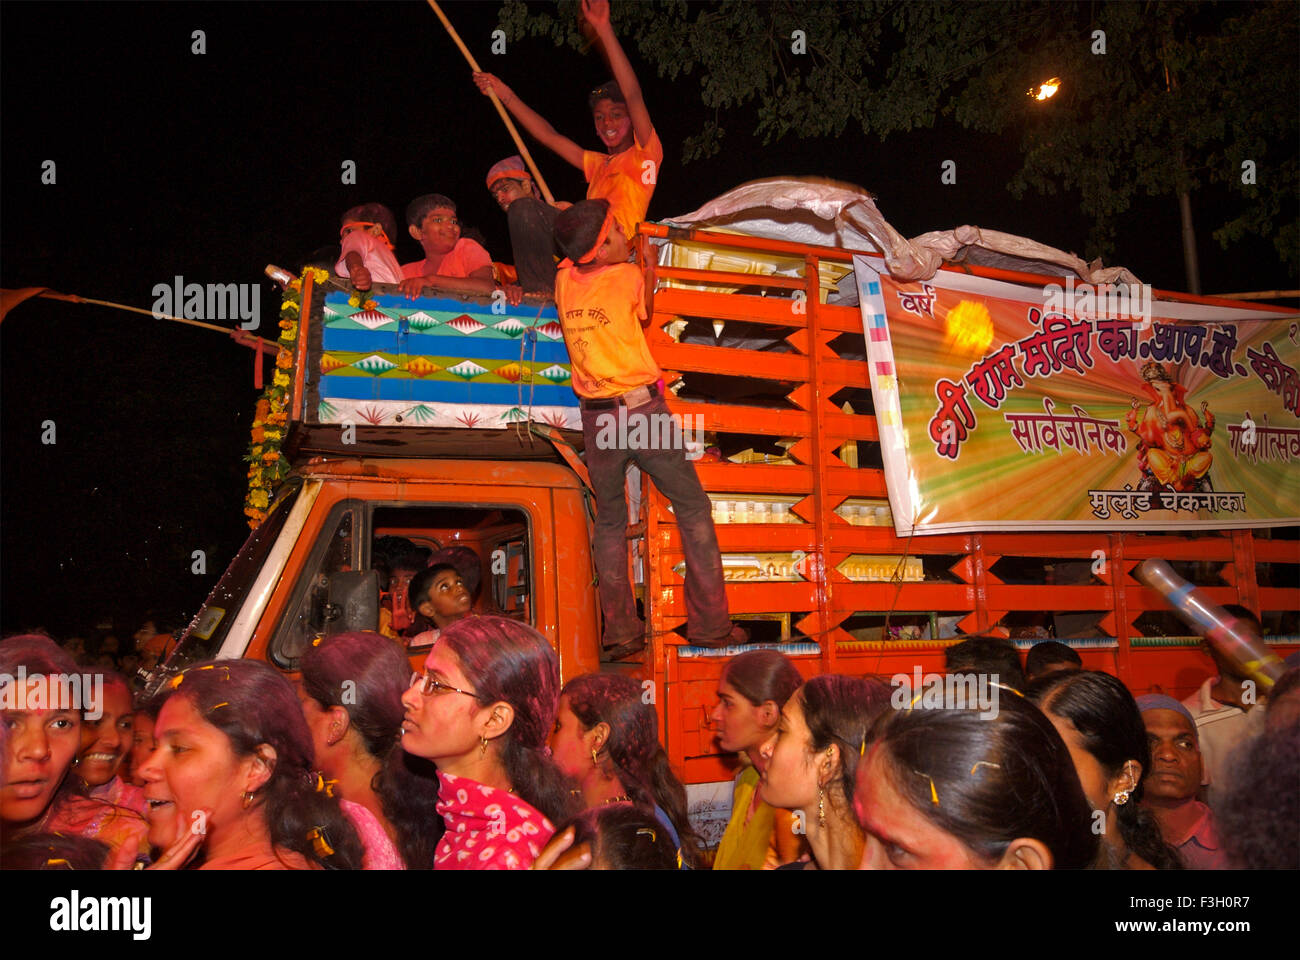 Ganesh festival, camion avec Lord Ganpati idol pour immersion, Mulund, Mumbai, Inde Banque D'Images